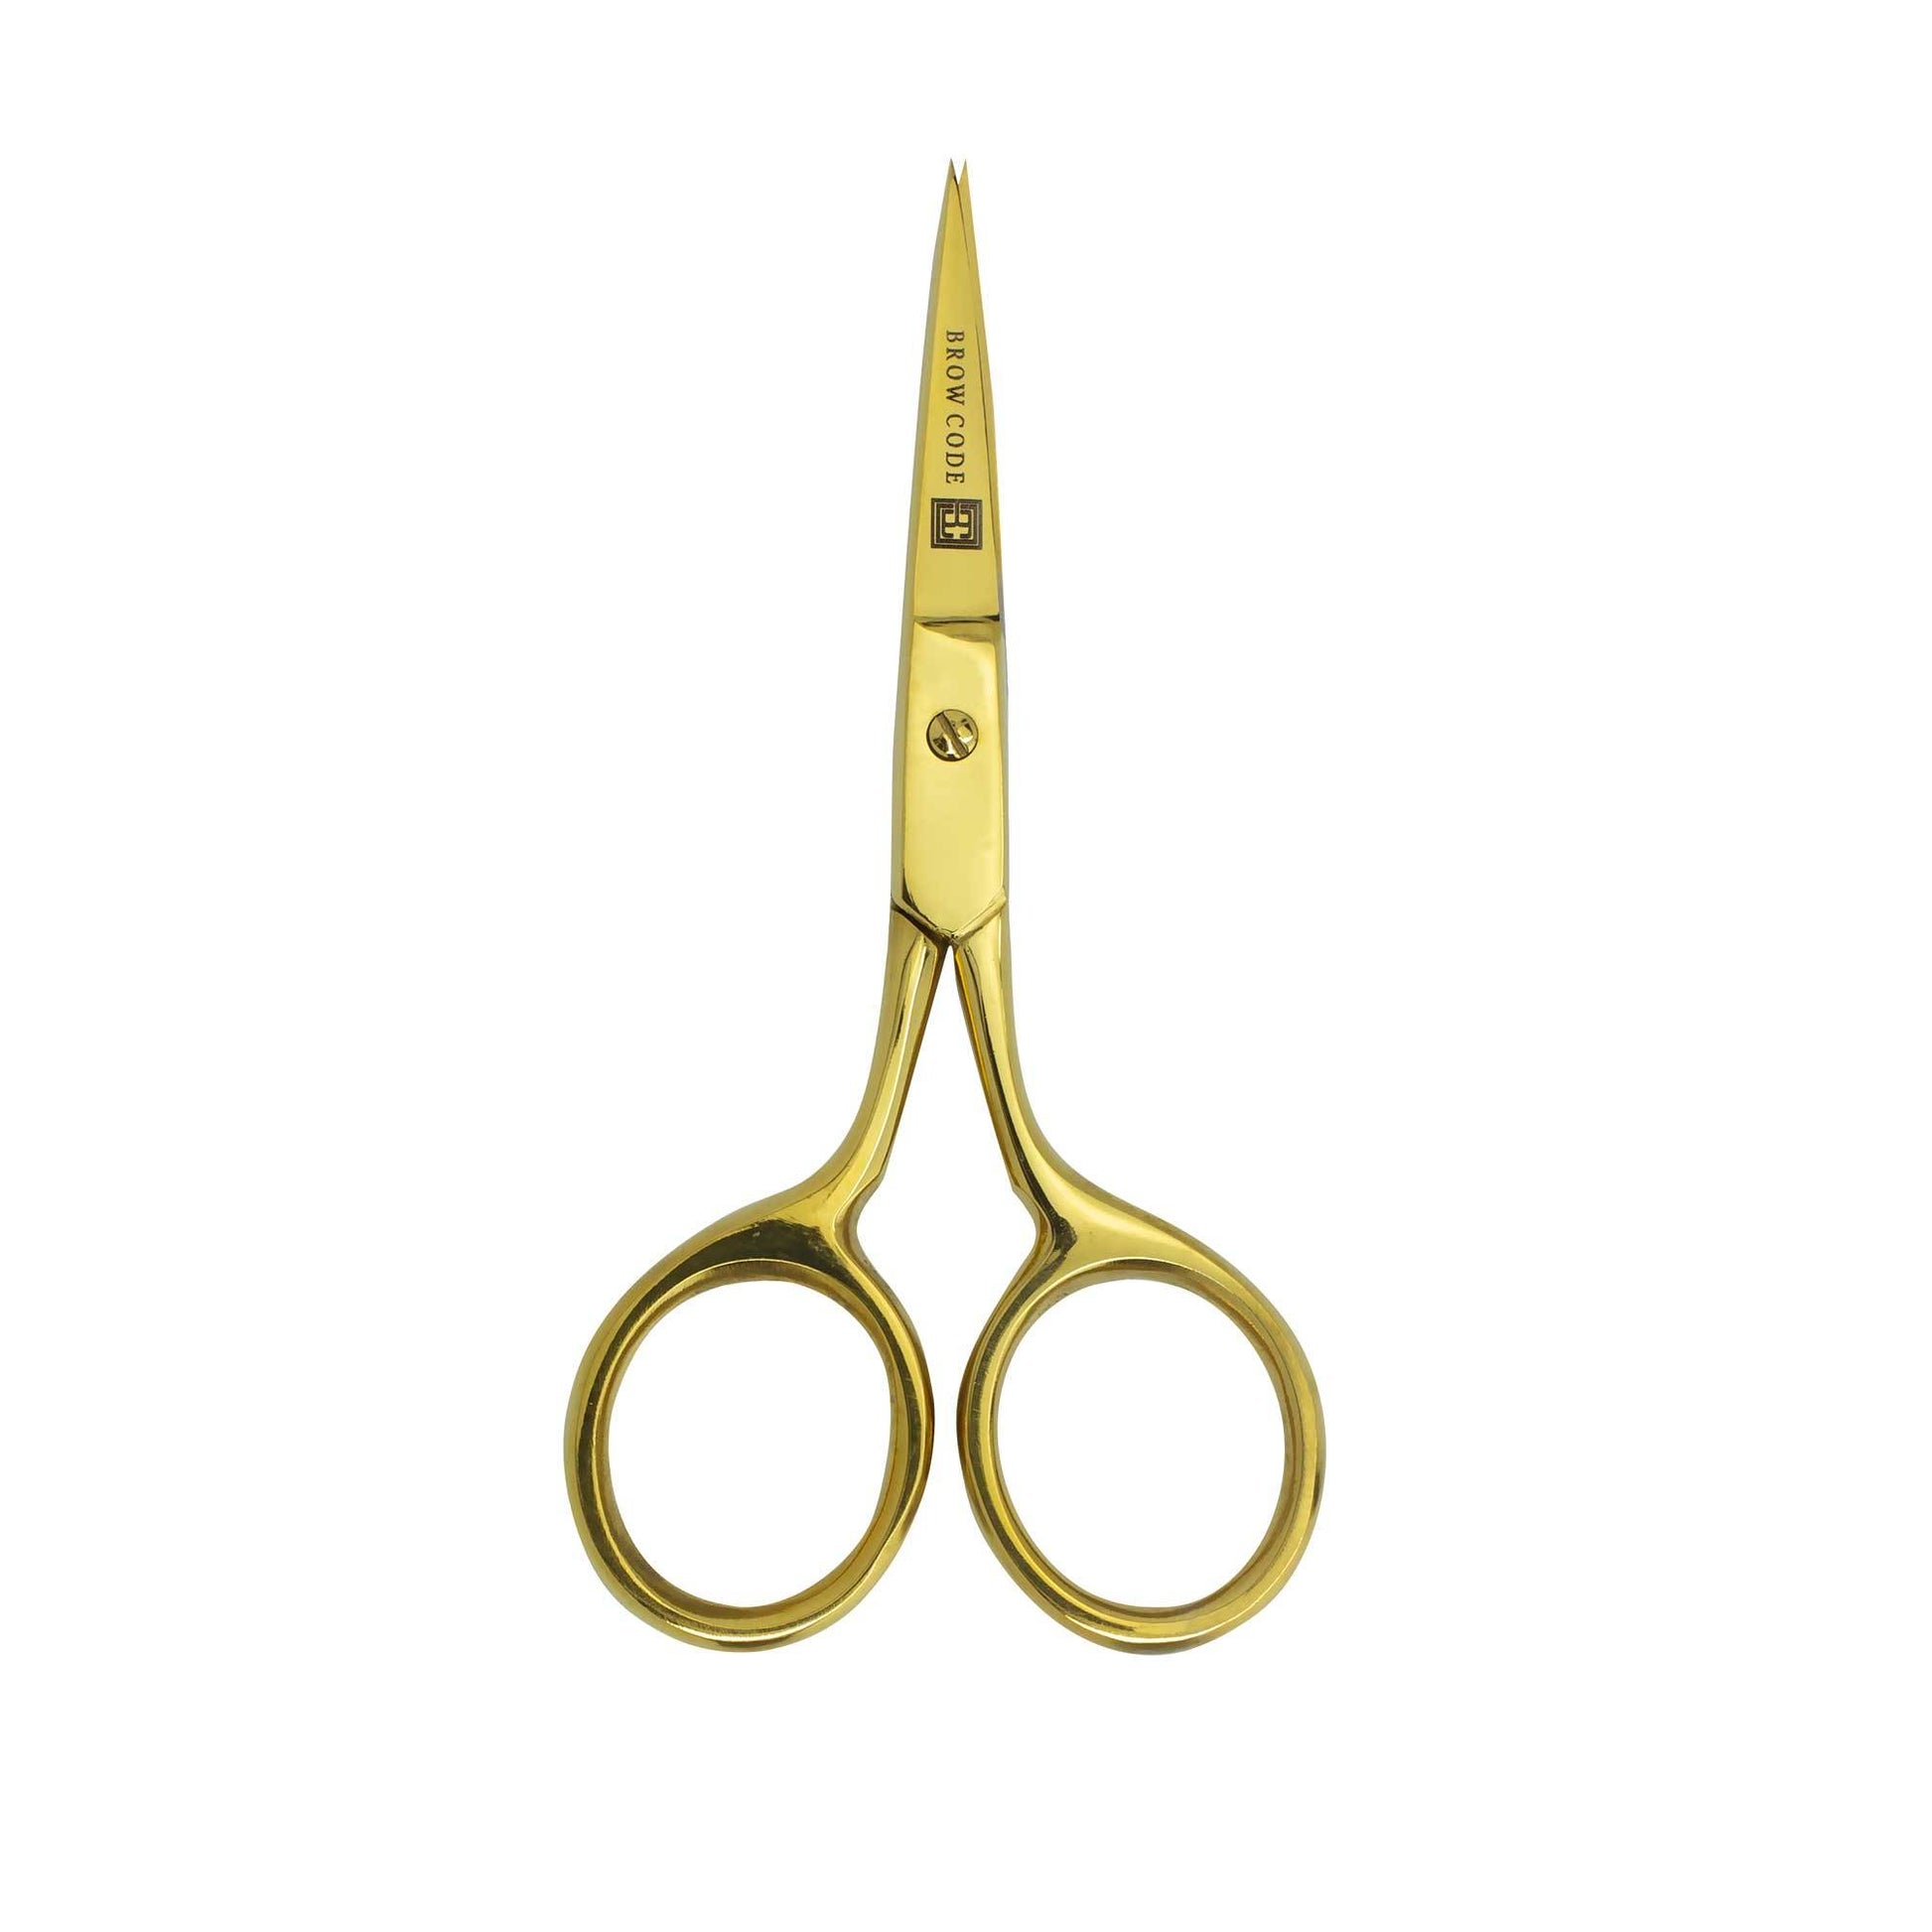 Trimming Scissors against a white background